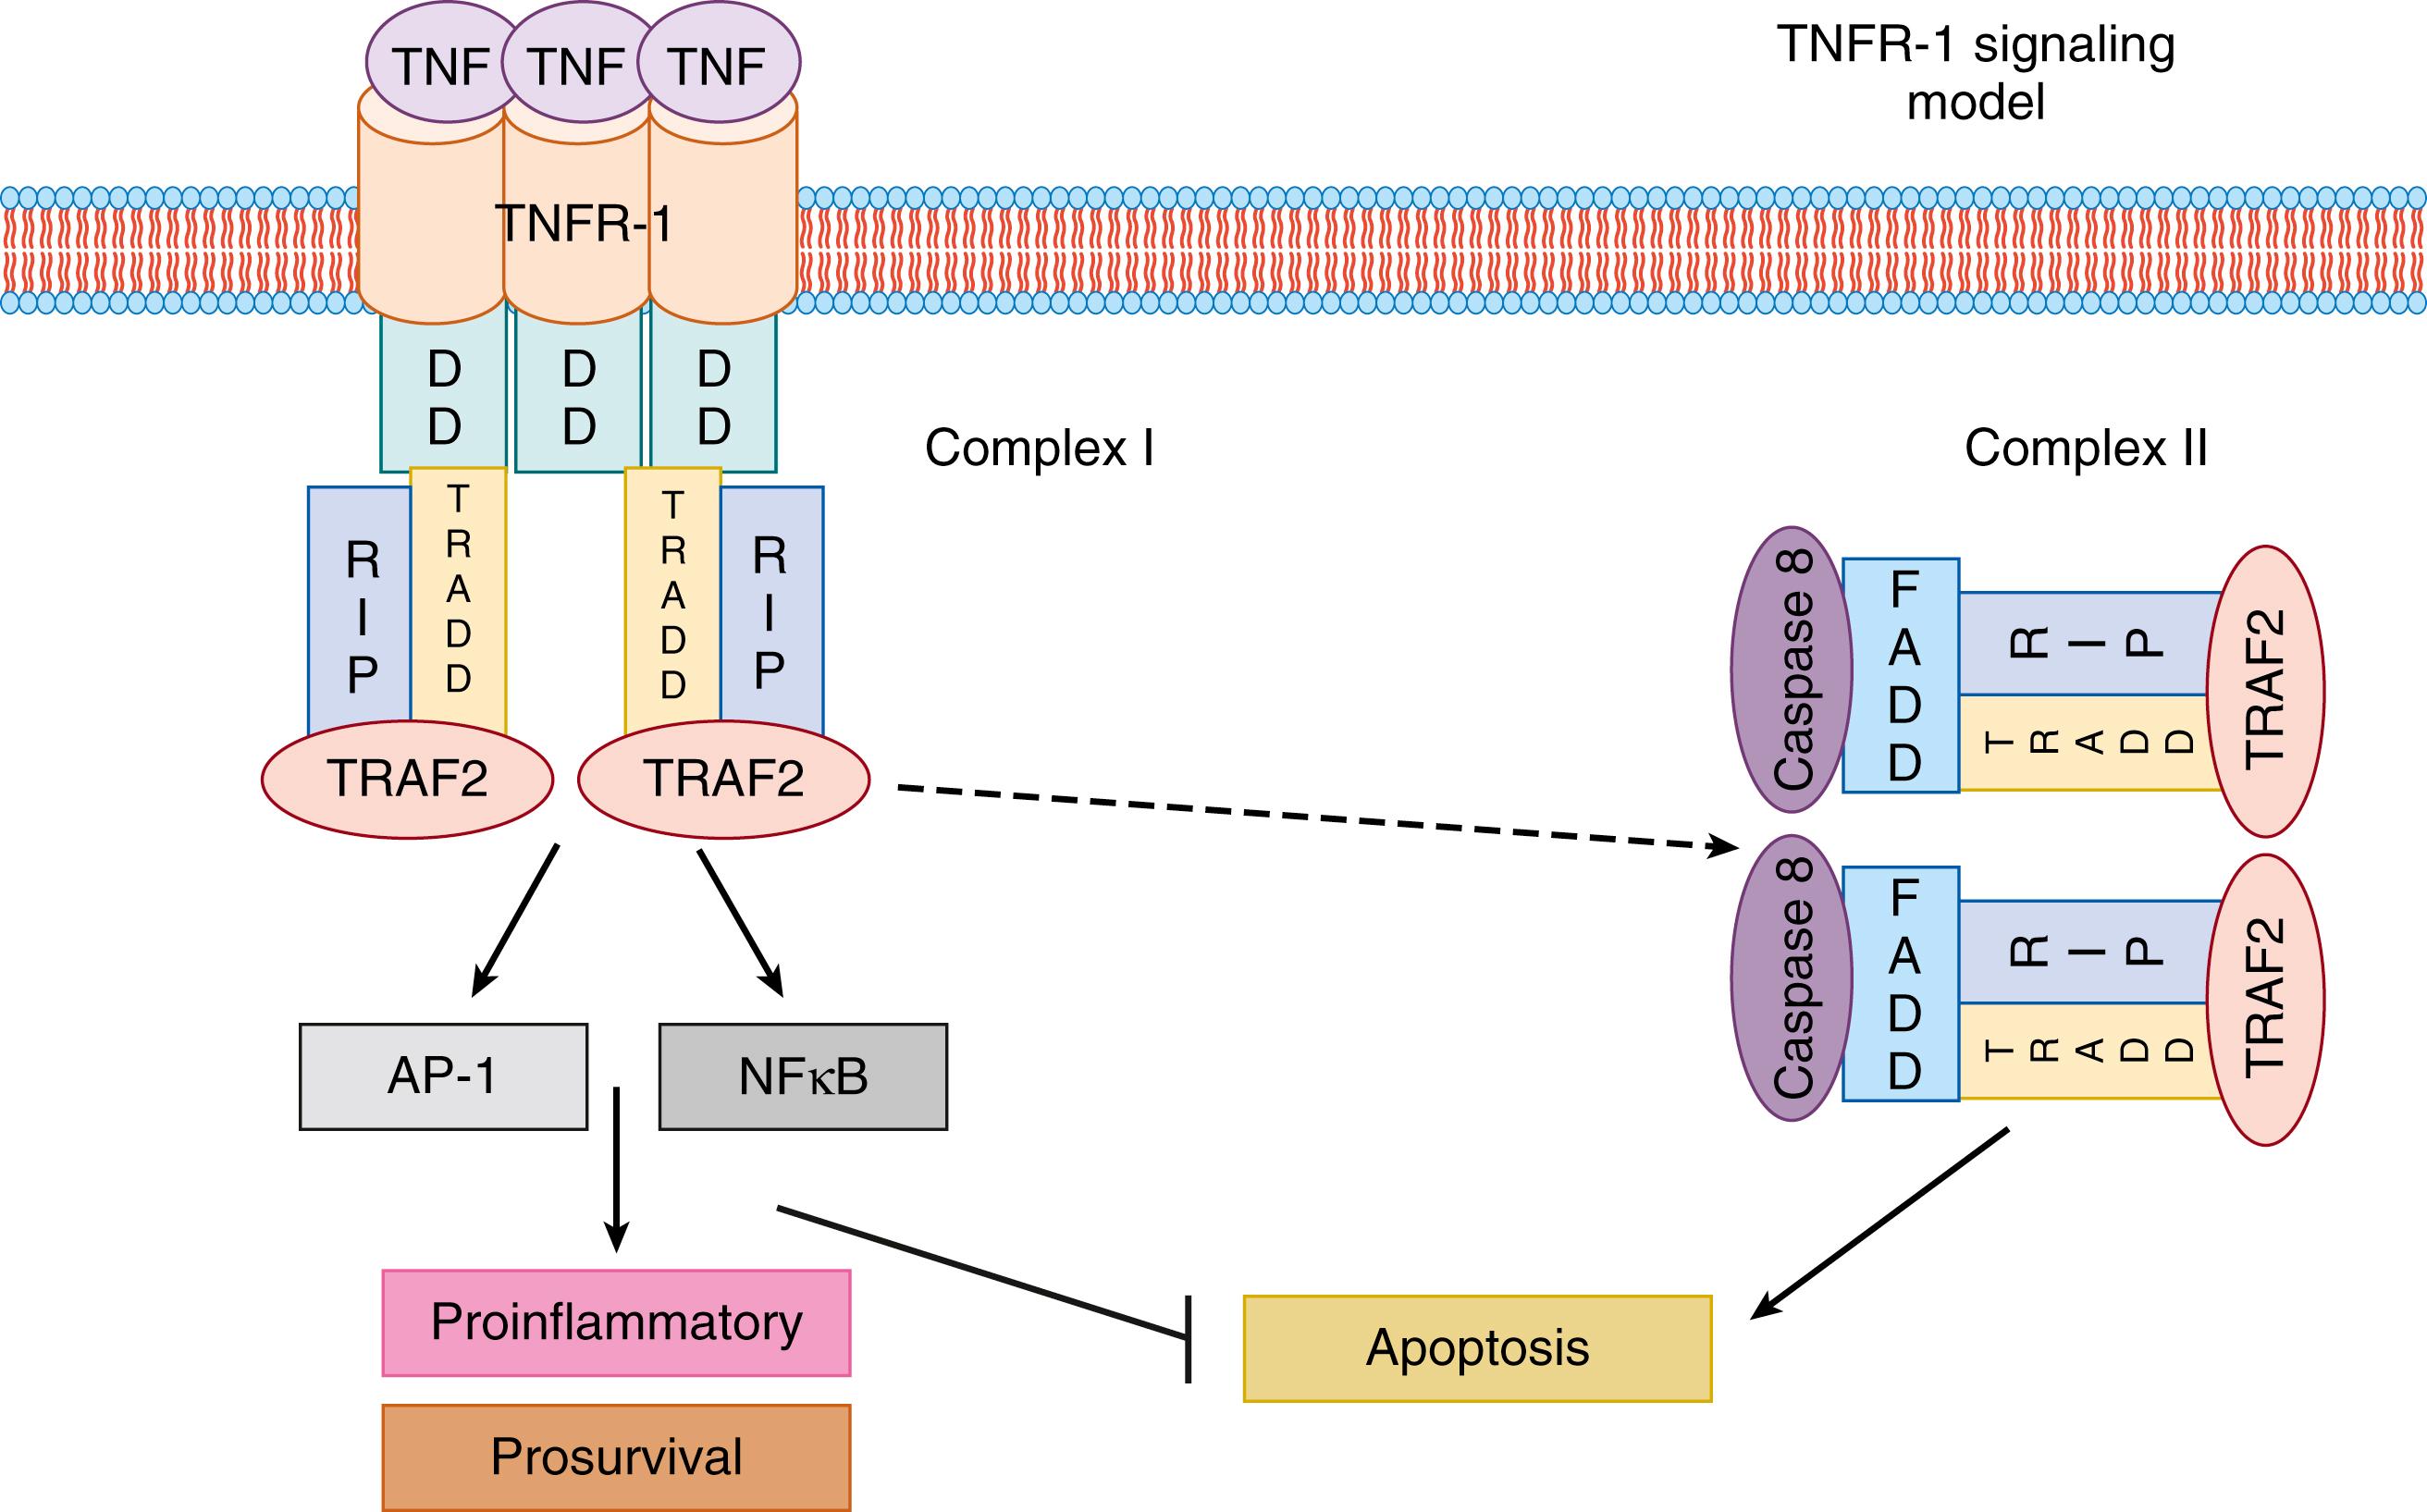 Fig. 121.1, The tumor necrosis factor receptor 1 (TNFR-1) signaling complex. Binding of tumor necrosis factor (TNF) to TNFR1 results in the recruitment and formation of a TNFR-1 signaling complex. TNFR-1-associated death domain (TRADD) associates with TNFR-1 through death domain (DD) interactions and serves as a platform for the recruitment of other adaptor proteins, including TNF receptor–associated factor 2 (TRAF2) and receptor-interacting protein (RIP) to form complex I. These adapter proteins recruit additional components necessary for the activation of proinflammatory and antiapoptotic pathways through the activation of transcription factors, such as nuclear factor κB (NFκB) and activator protein 1 (AP-1) . Complex II is formed when TRADD-RIP-TRAF2 disassociates from TNFR-1. Subsequent recruitment of Fas-associated death domain (FADD) and caspase 8 to this complex initiates TNF-mediated apoptosis.